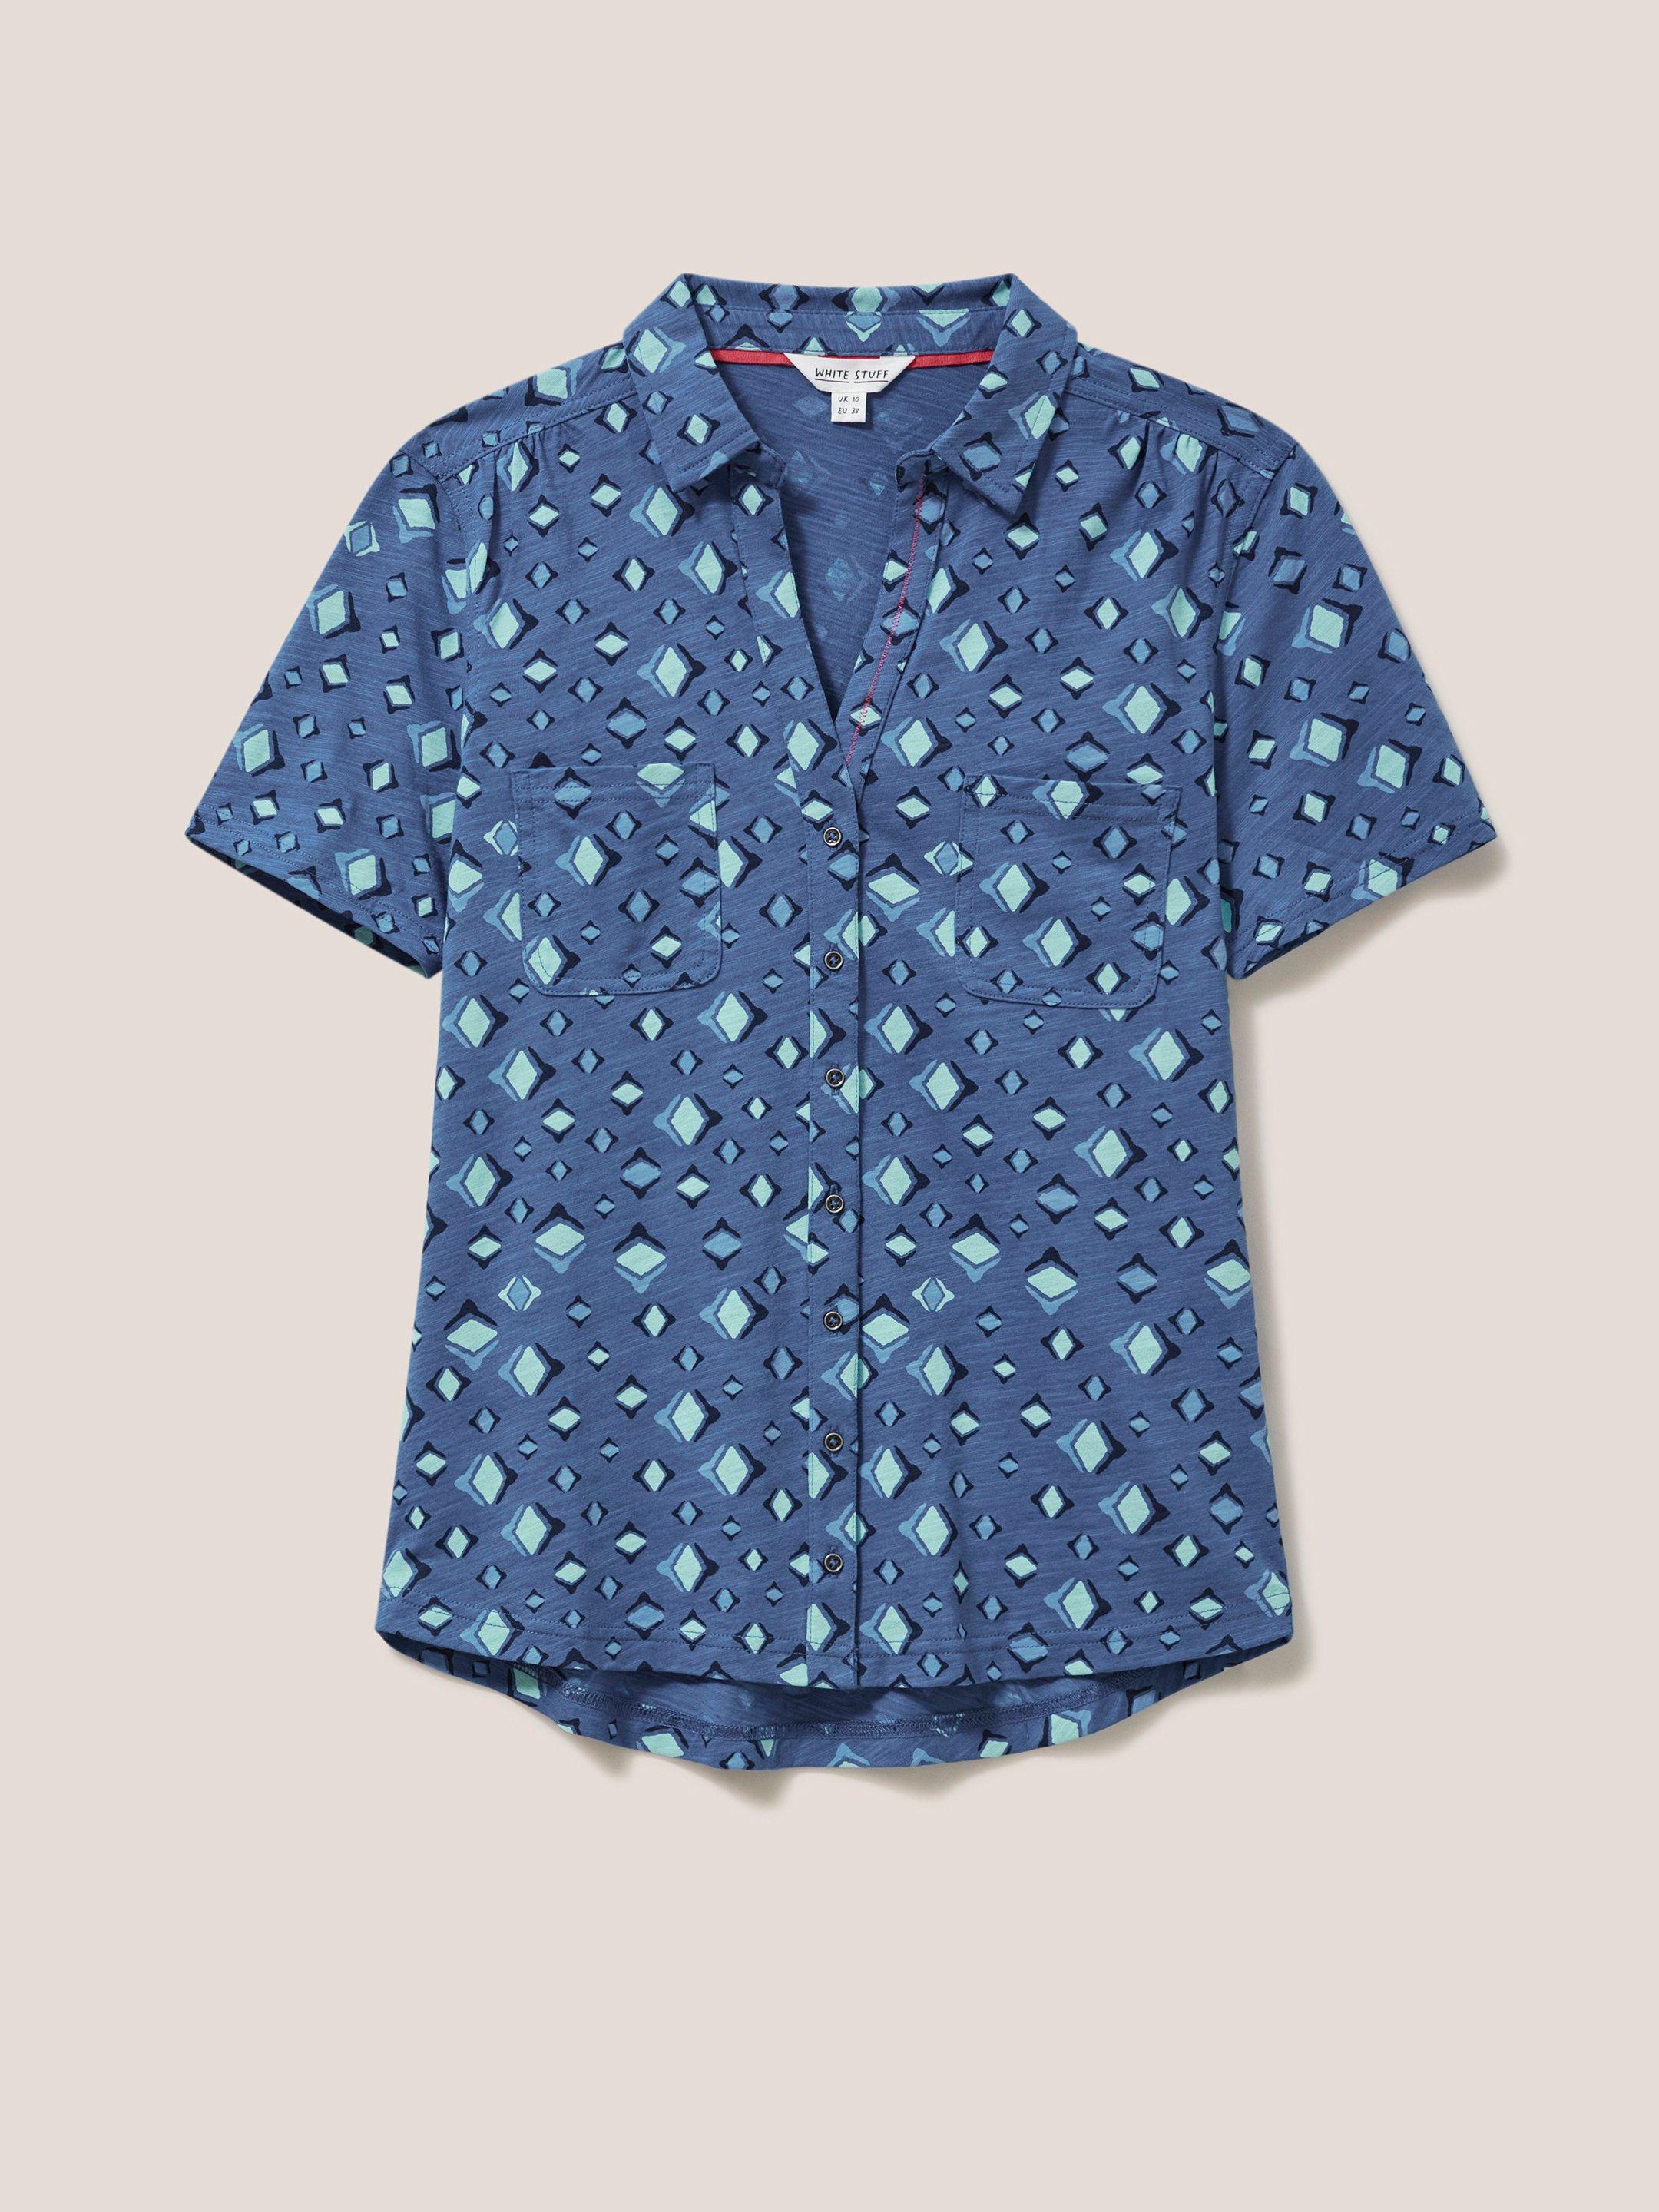 Penny Pocket Cotton Jersey Shirt in BLUE PR - FLAT FRONT